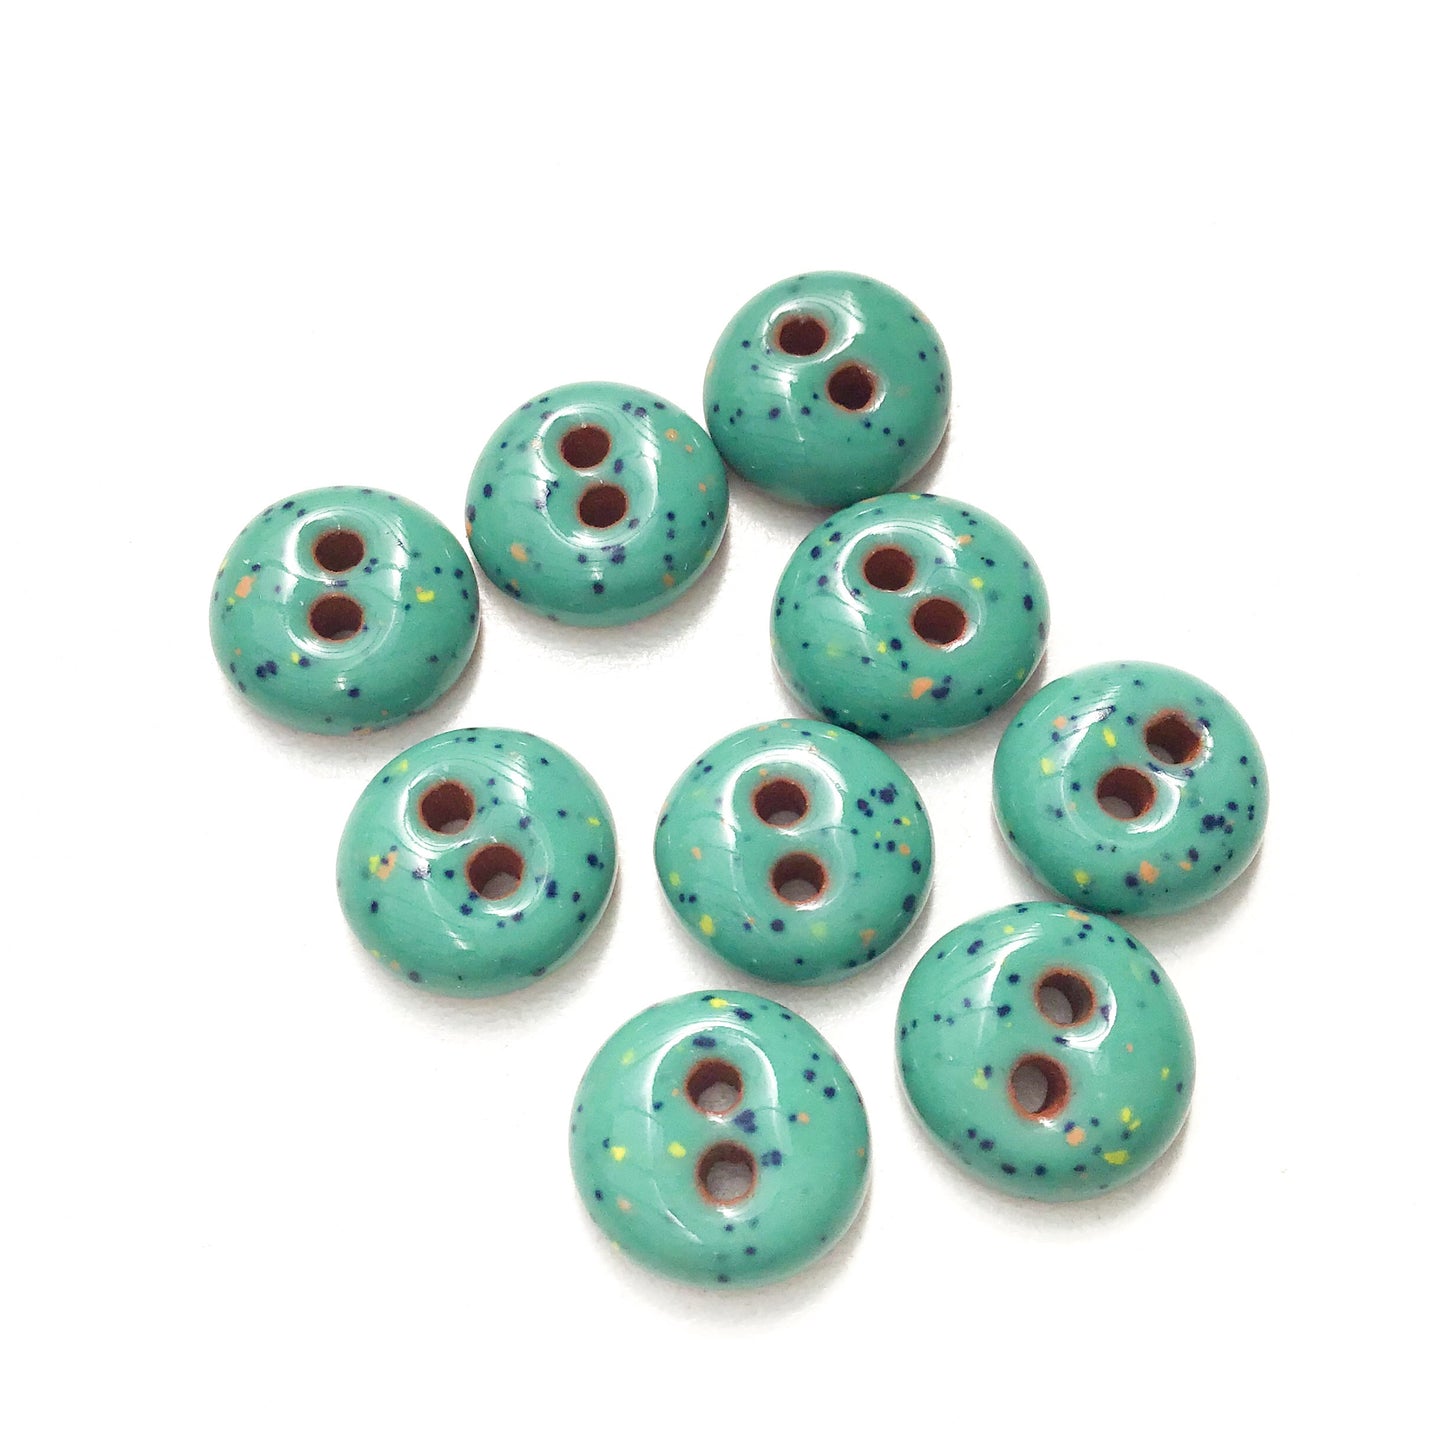 Speckled Turquoise Ceramic Buttons - Hand Made Clay Buttons - 7/16" - 9 Pack